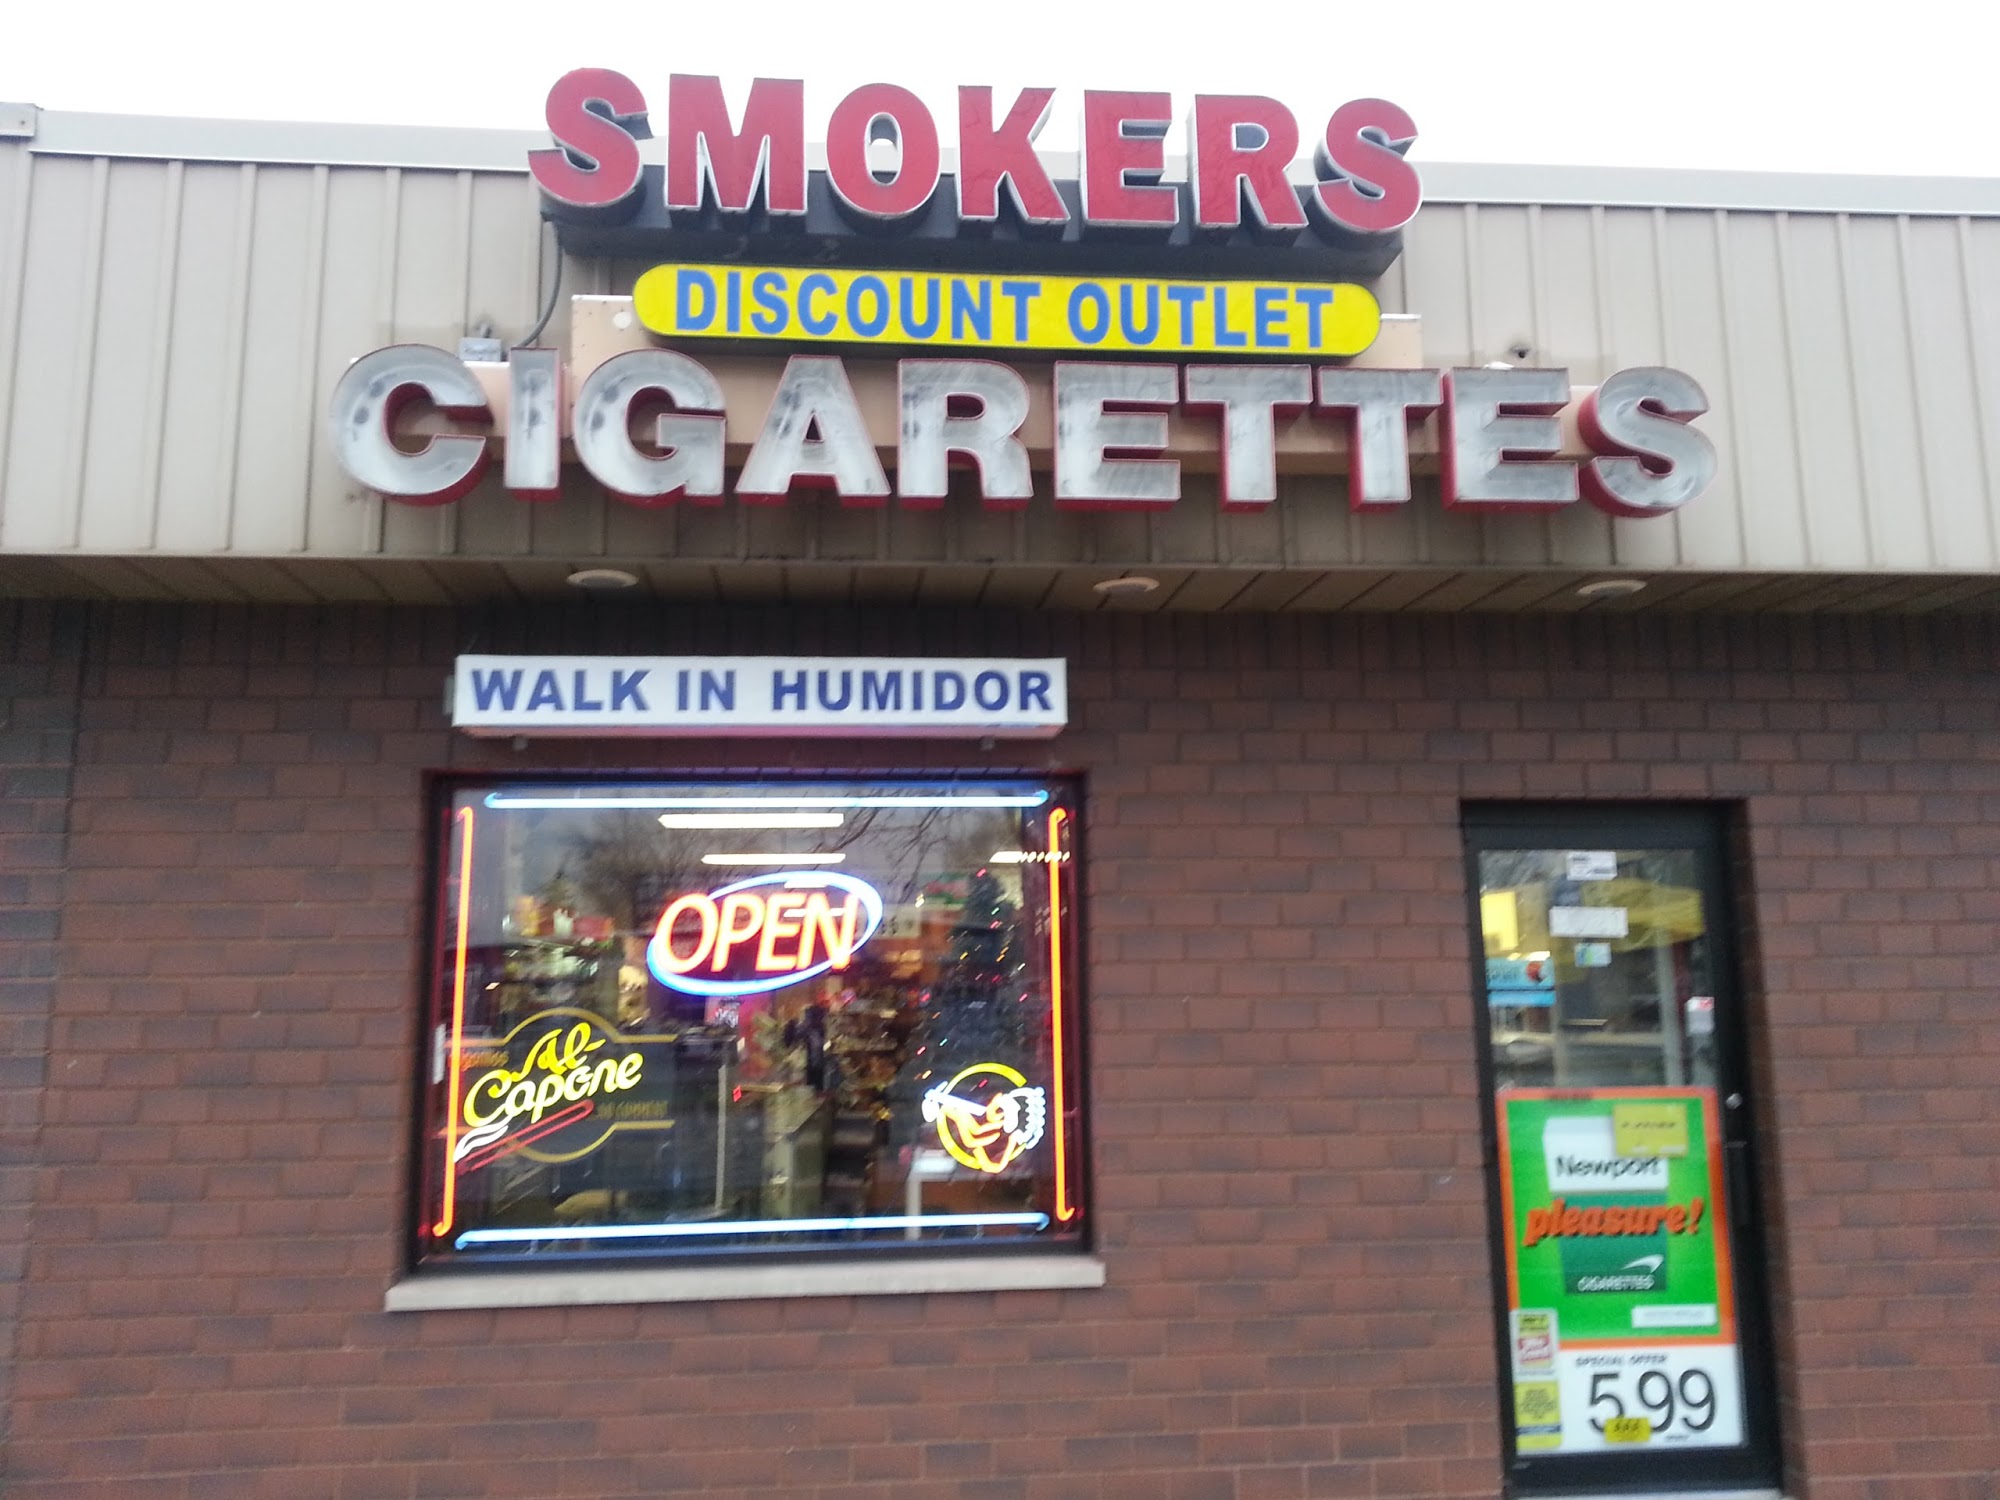 Smokers Discount Outlet